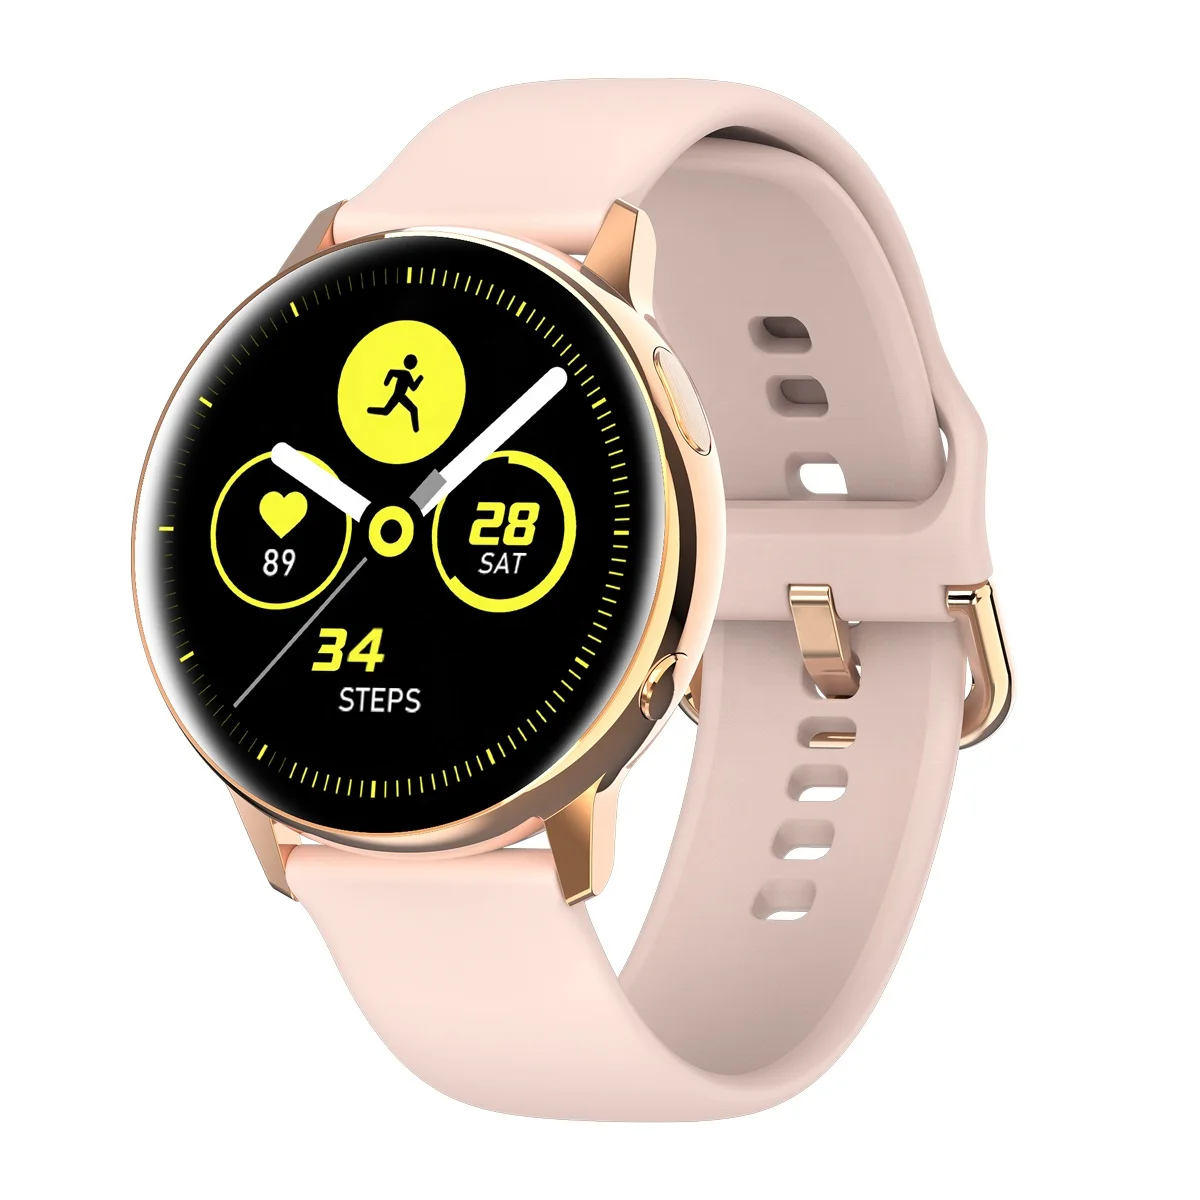 

Dropshipping SG2 1.2 Inch Full Round Display Smartwatch IP68 Waterproof Heart Rate Monitoring SpO2 Sleep ECG Smart Watches